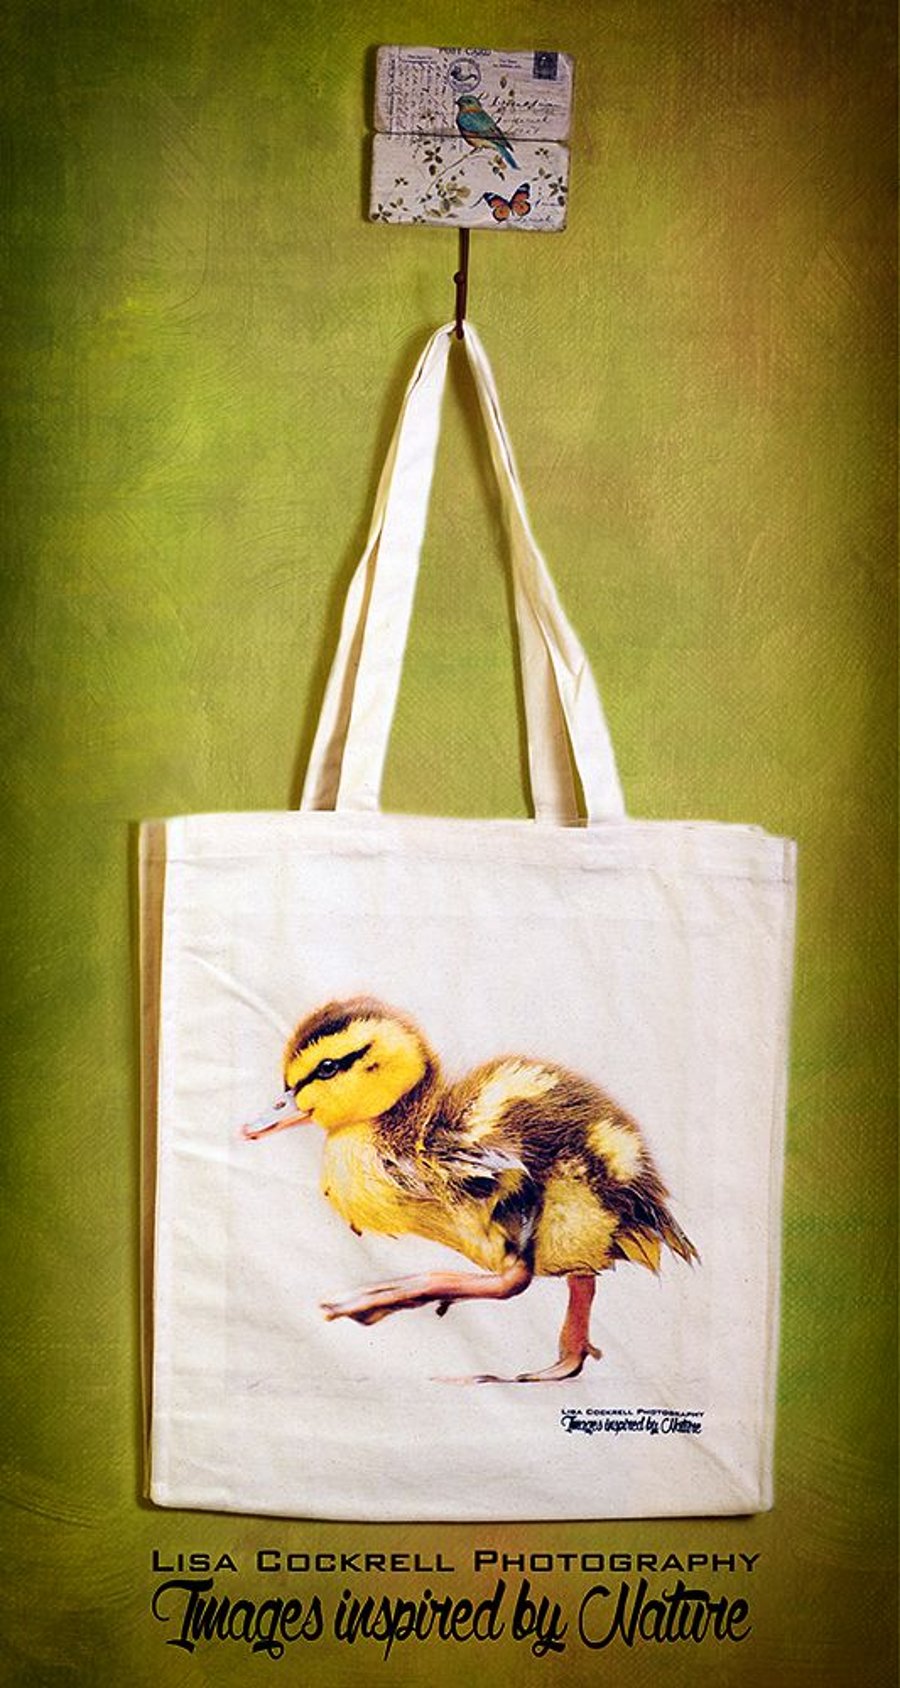 DUCKLING - TOTE BAGS INSPIRED BY NATURE FROM LISA COCKRELL PHOTOGRAPHY